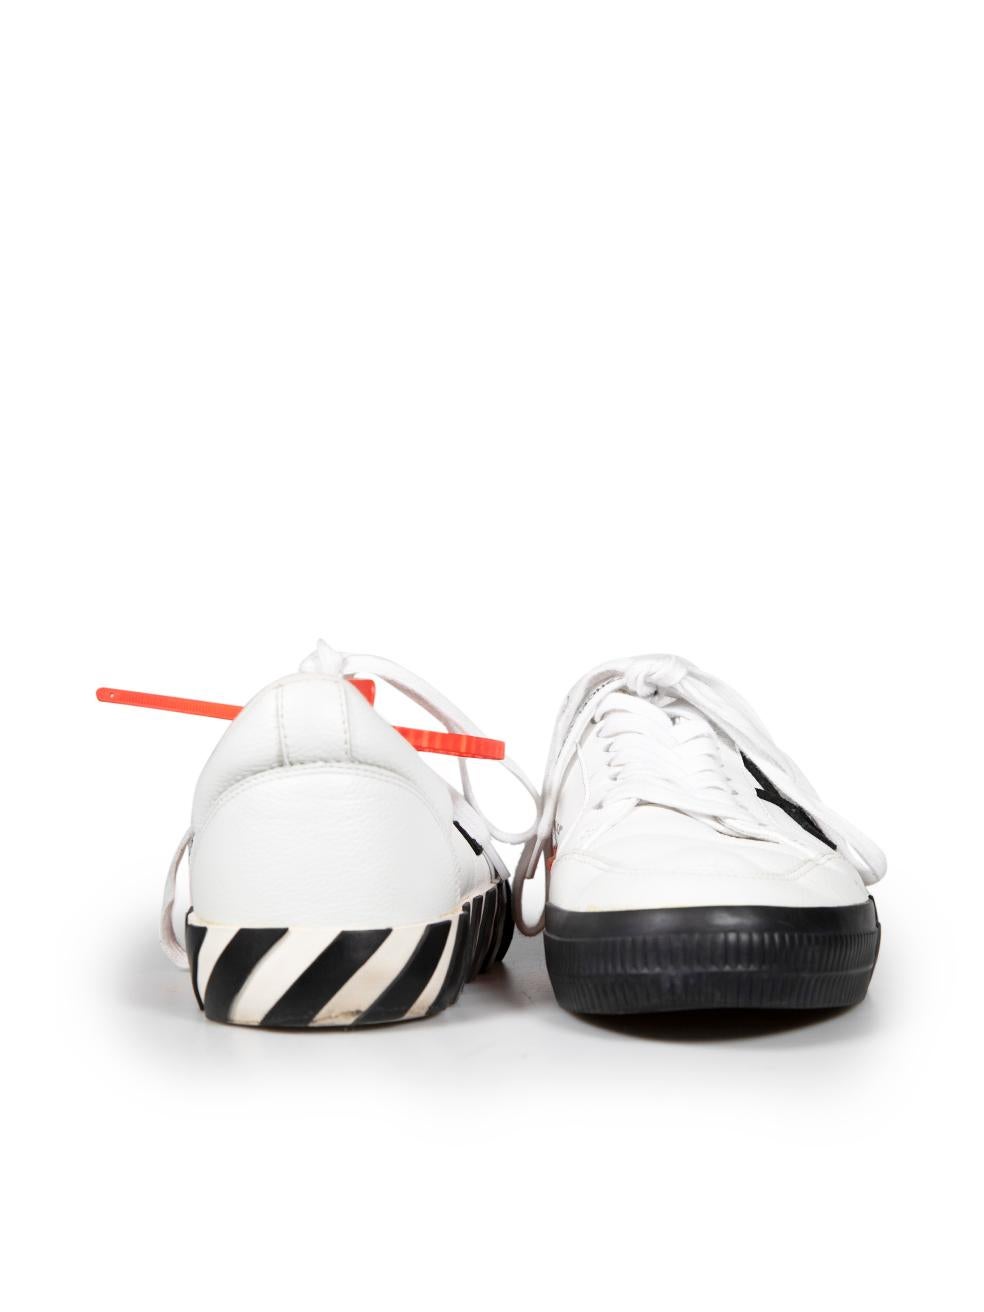 Off-White White Leather Zip Tie Vulcanized Trainers Size IT 41 In Good Condition For Sale In London, GB